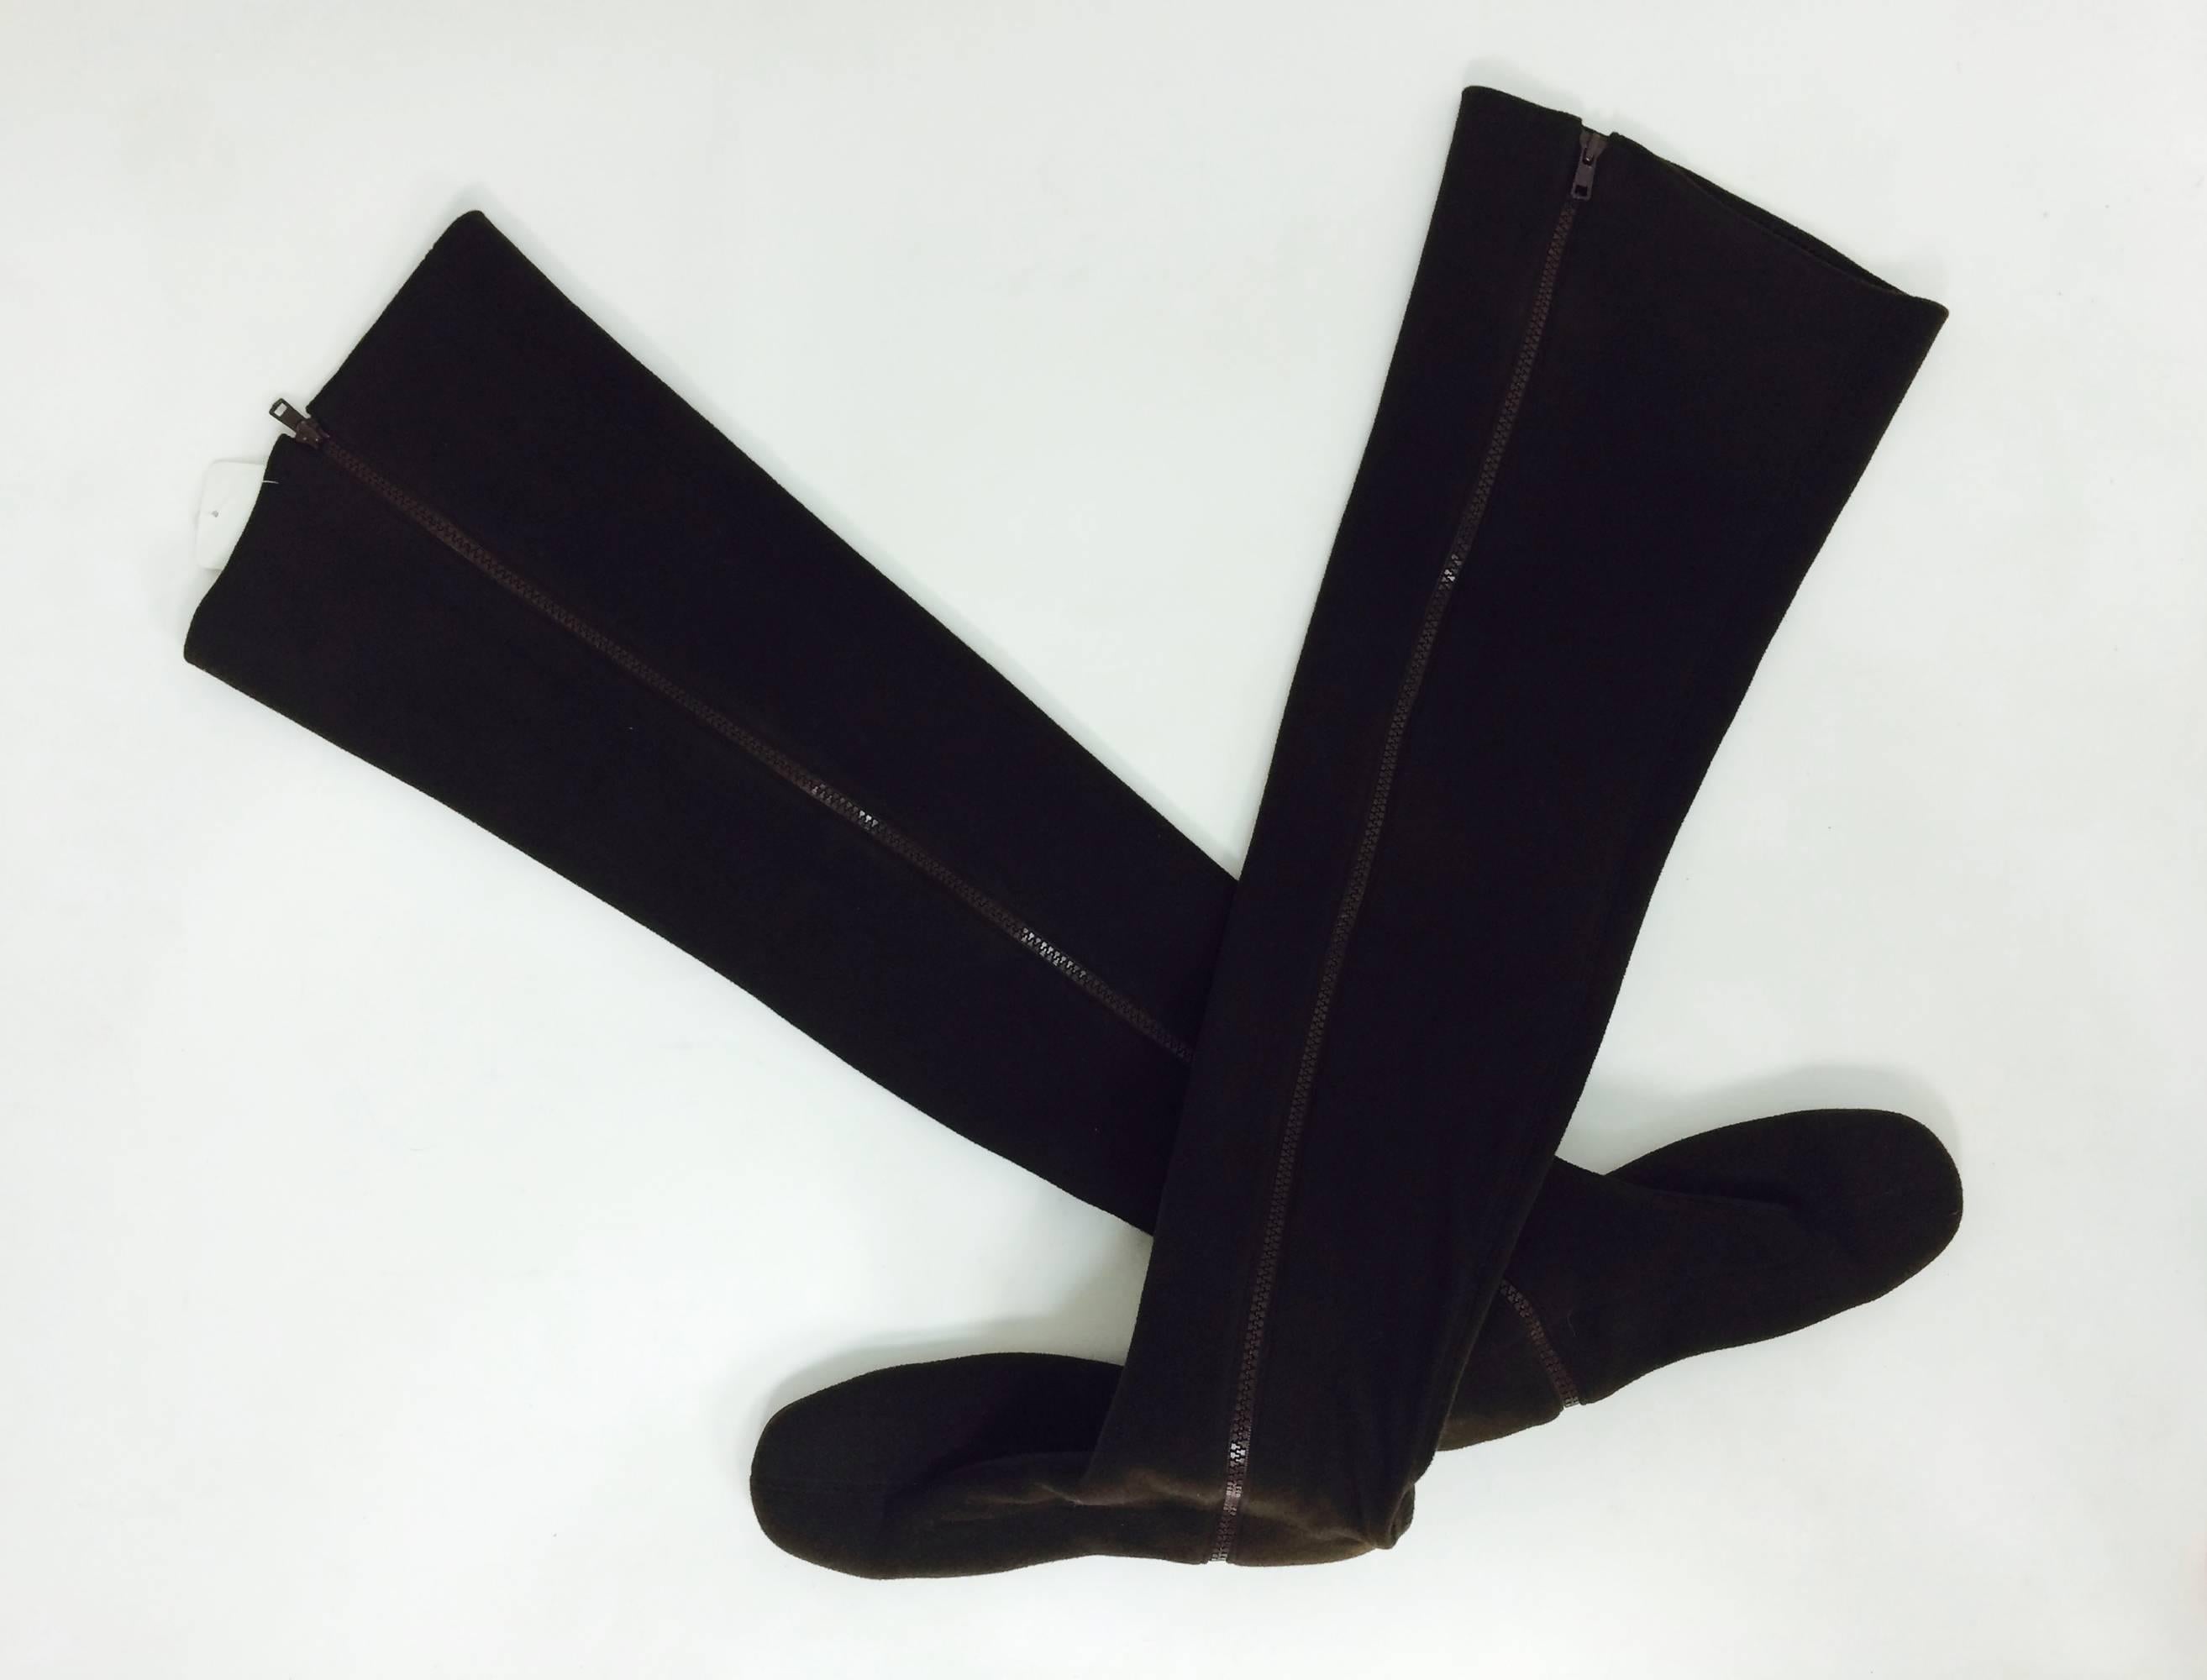 Andrea Pfister thigh high chocolate brown neoprene, side zipper boots. Velvety textured neoprene fabric with a bit of stretch, the boots close at each side with a heavy brown plastic zipper. Leather soles and heels with leather trims. These boots